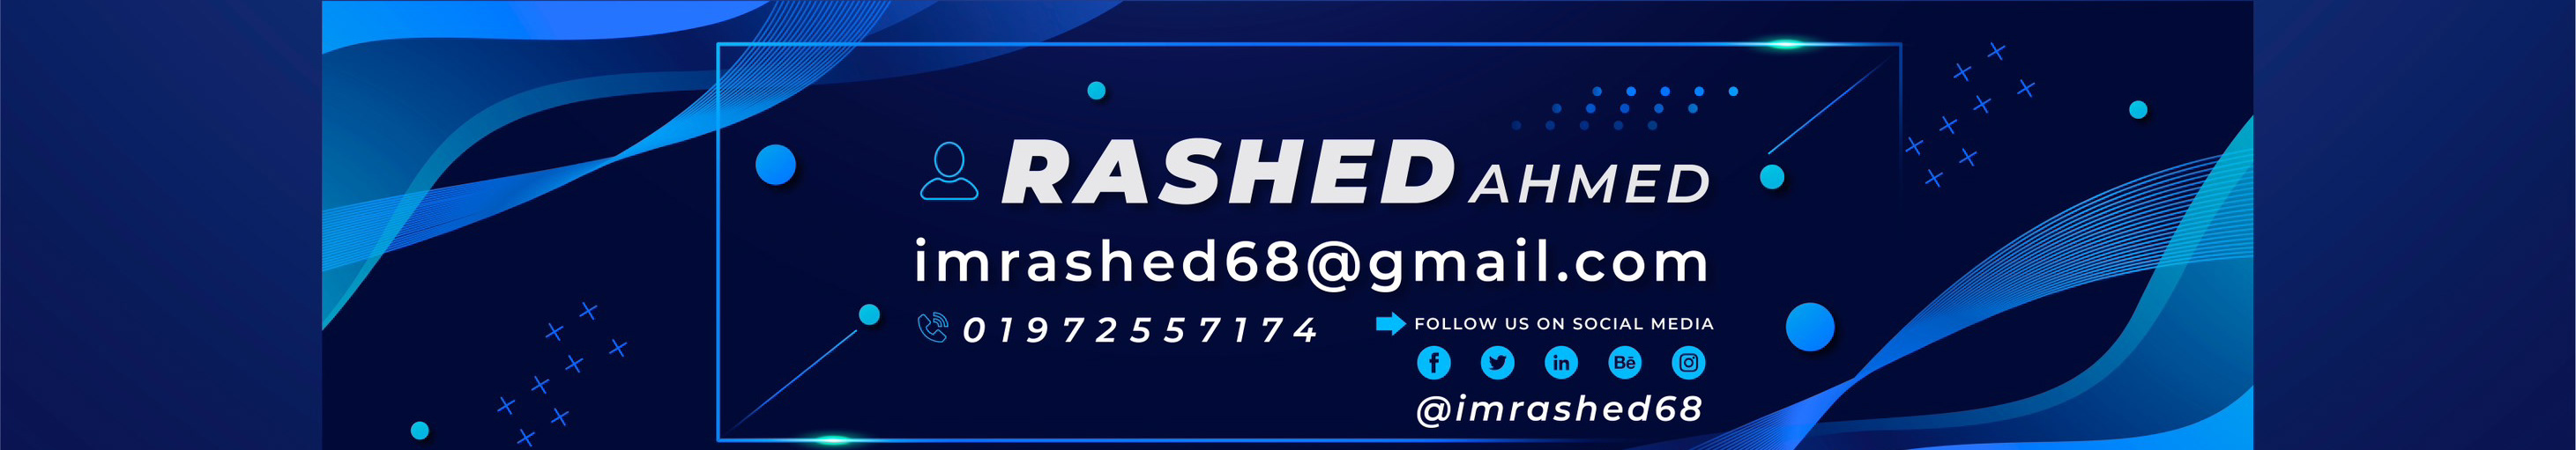 Rashed Ahmed's profile banner